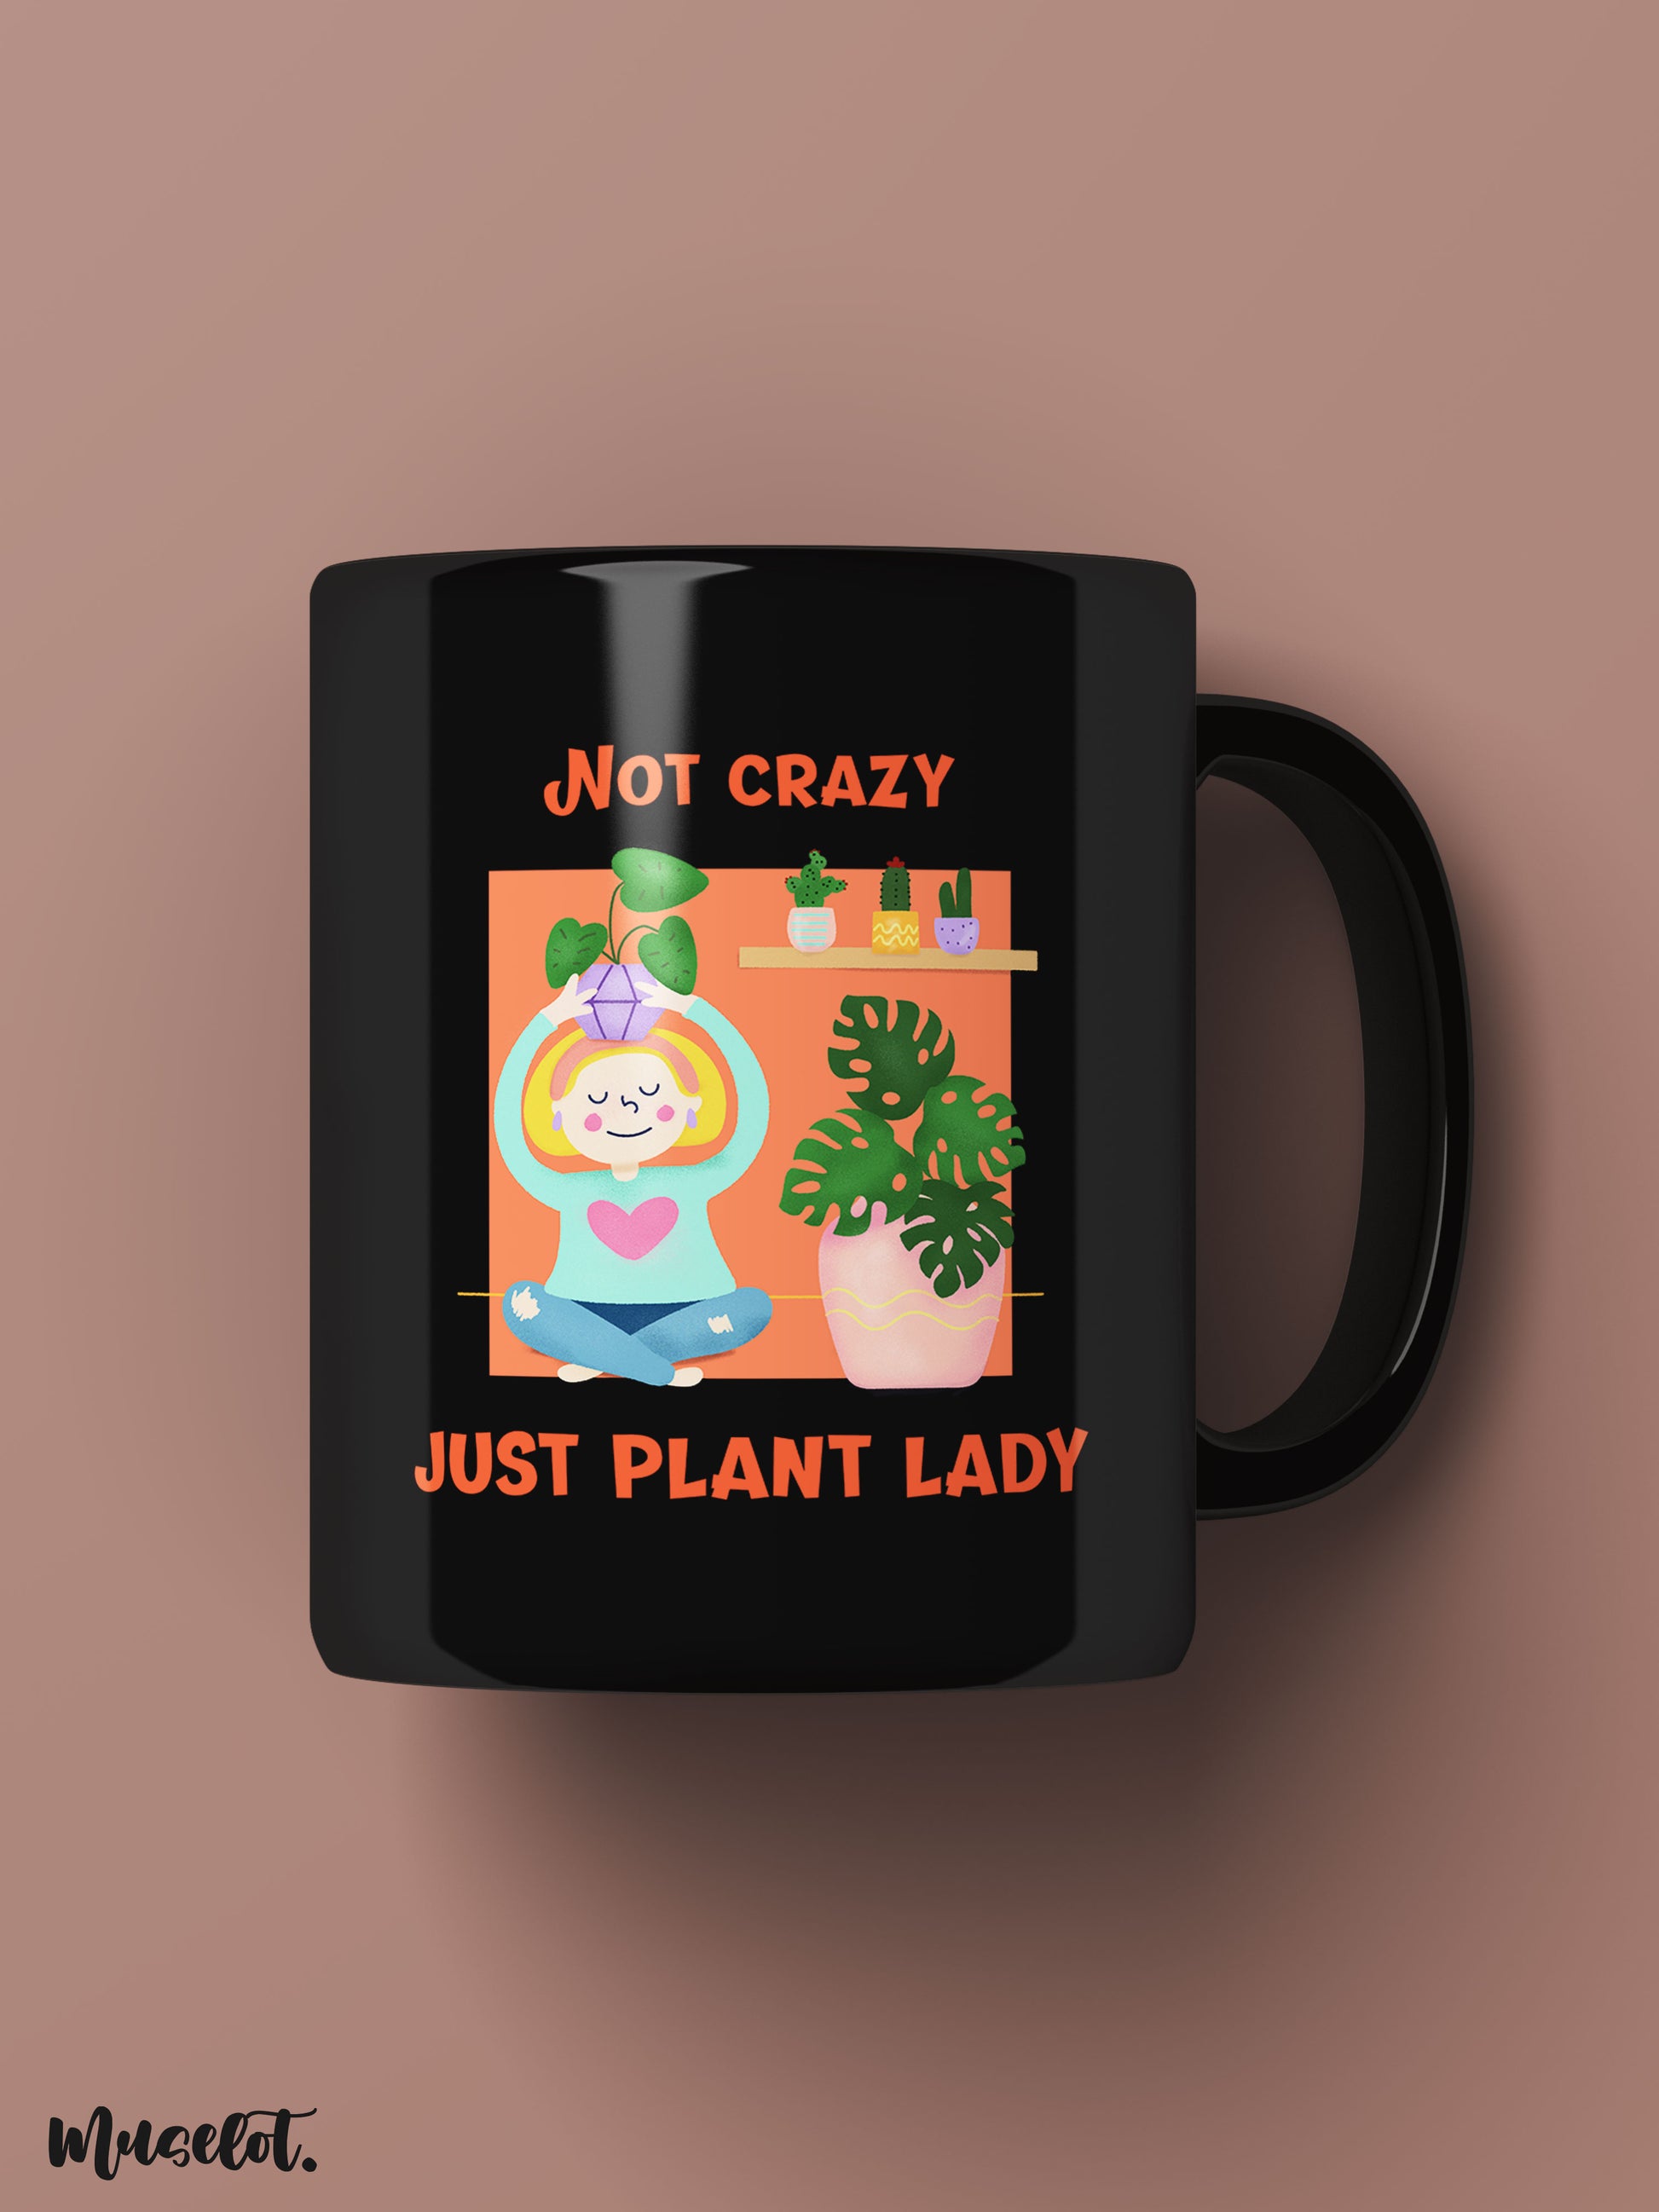 Not crazy, just plant lady printed black mugs online for plant lovers  - Muselot